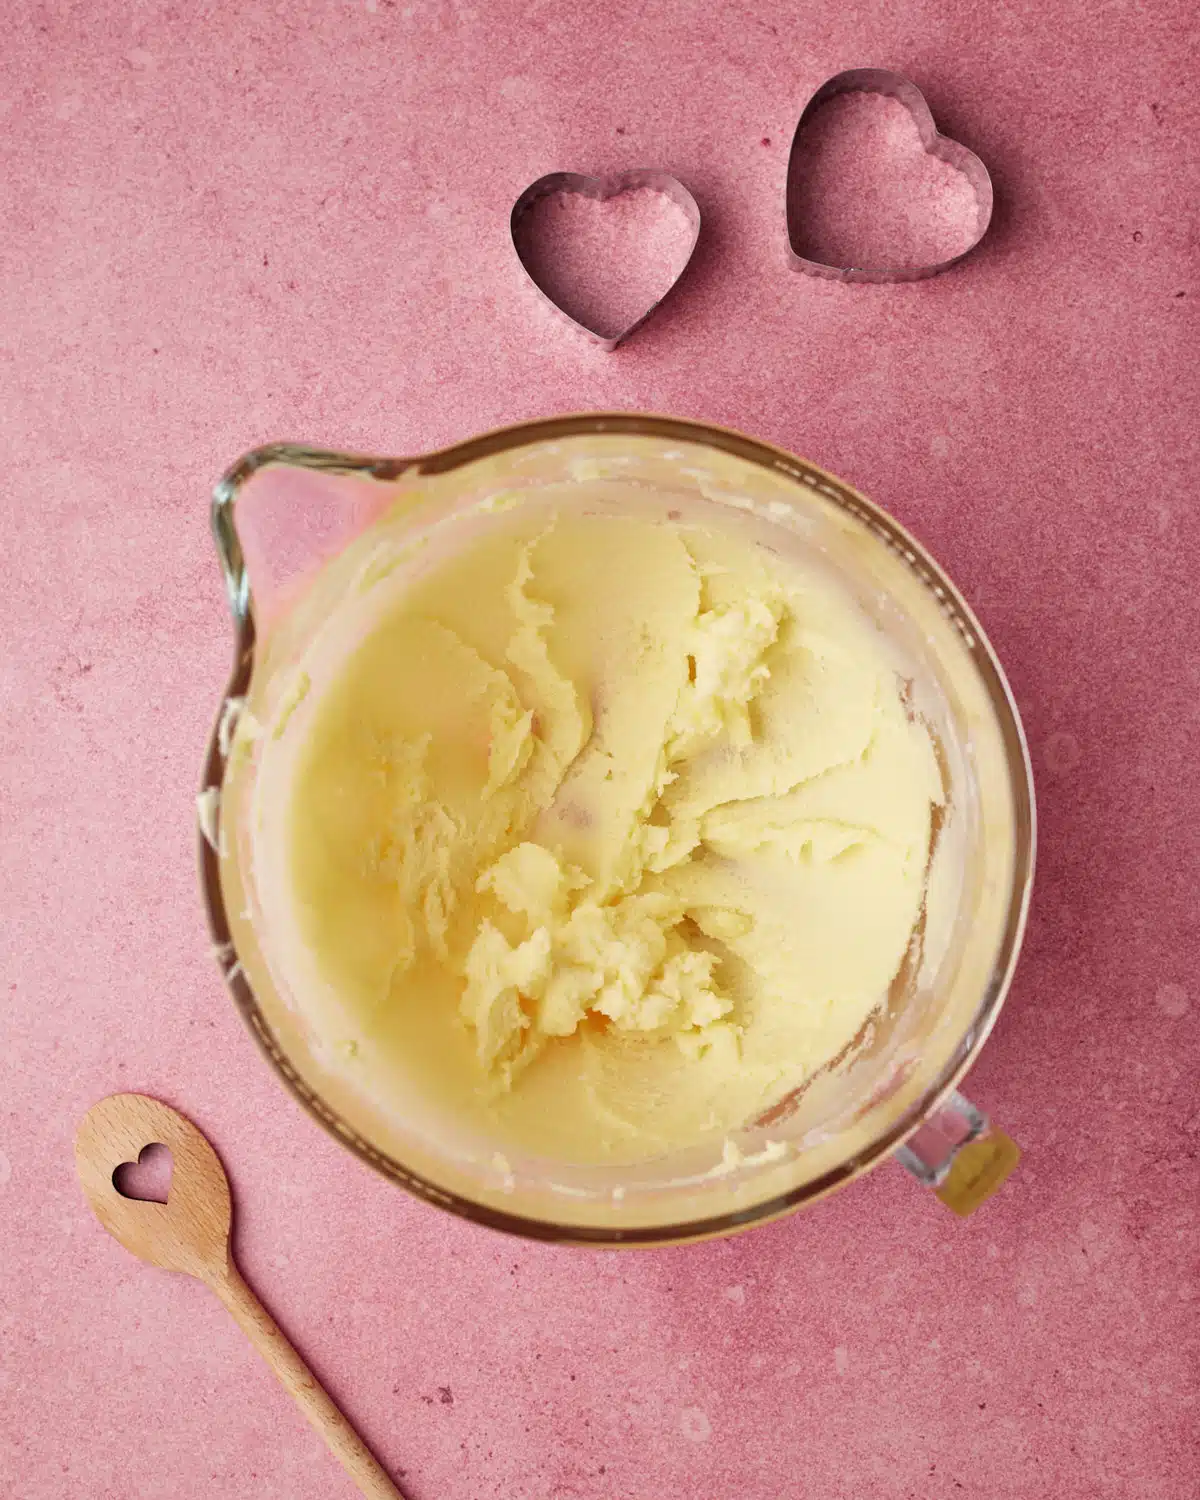 Butter and sugar creamed together to make heart shaped sugar cookies.